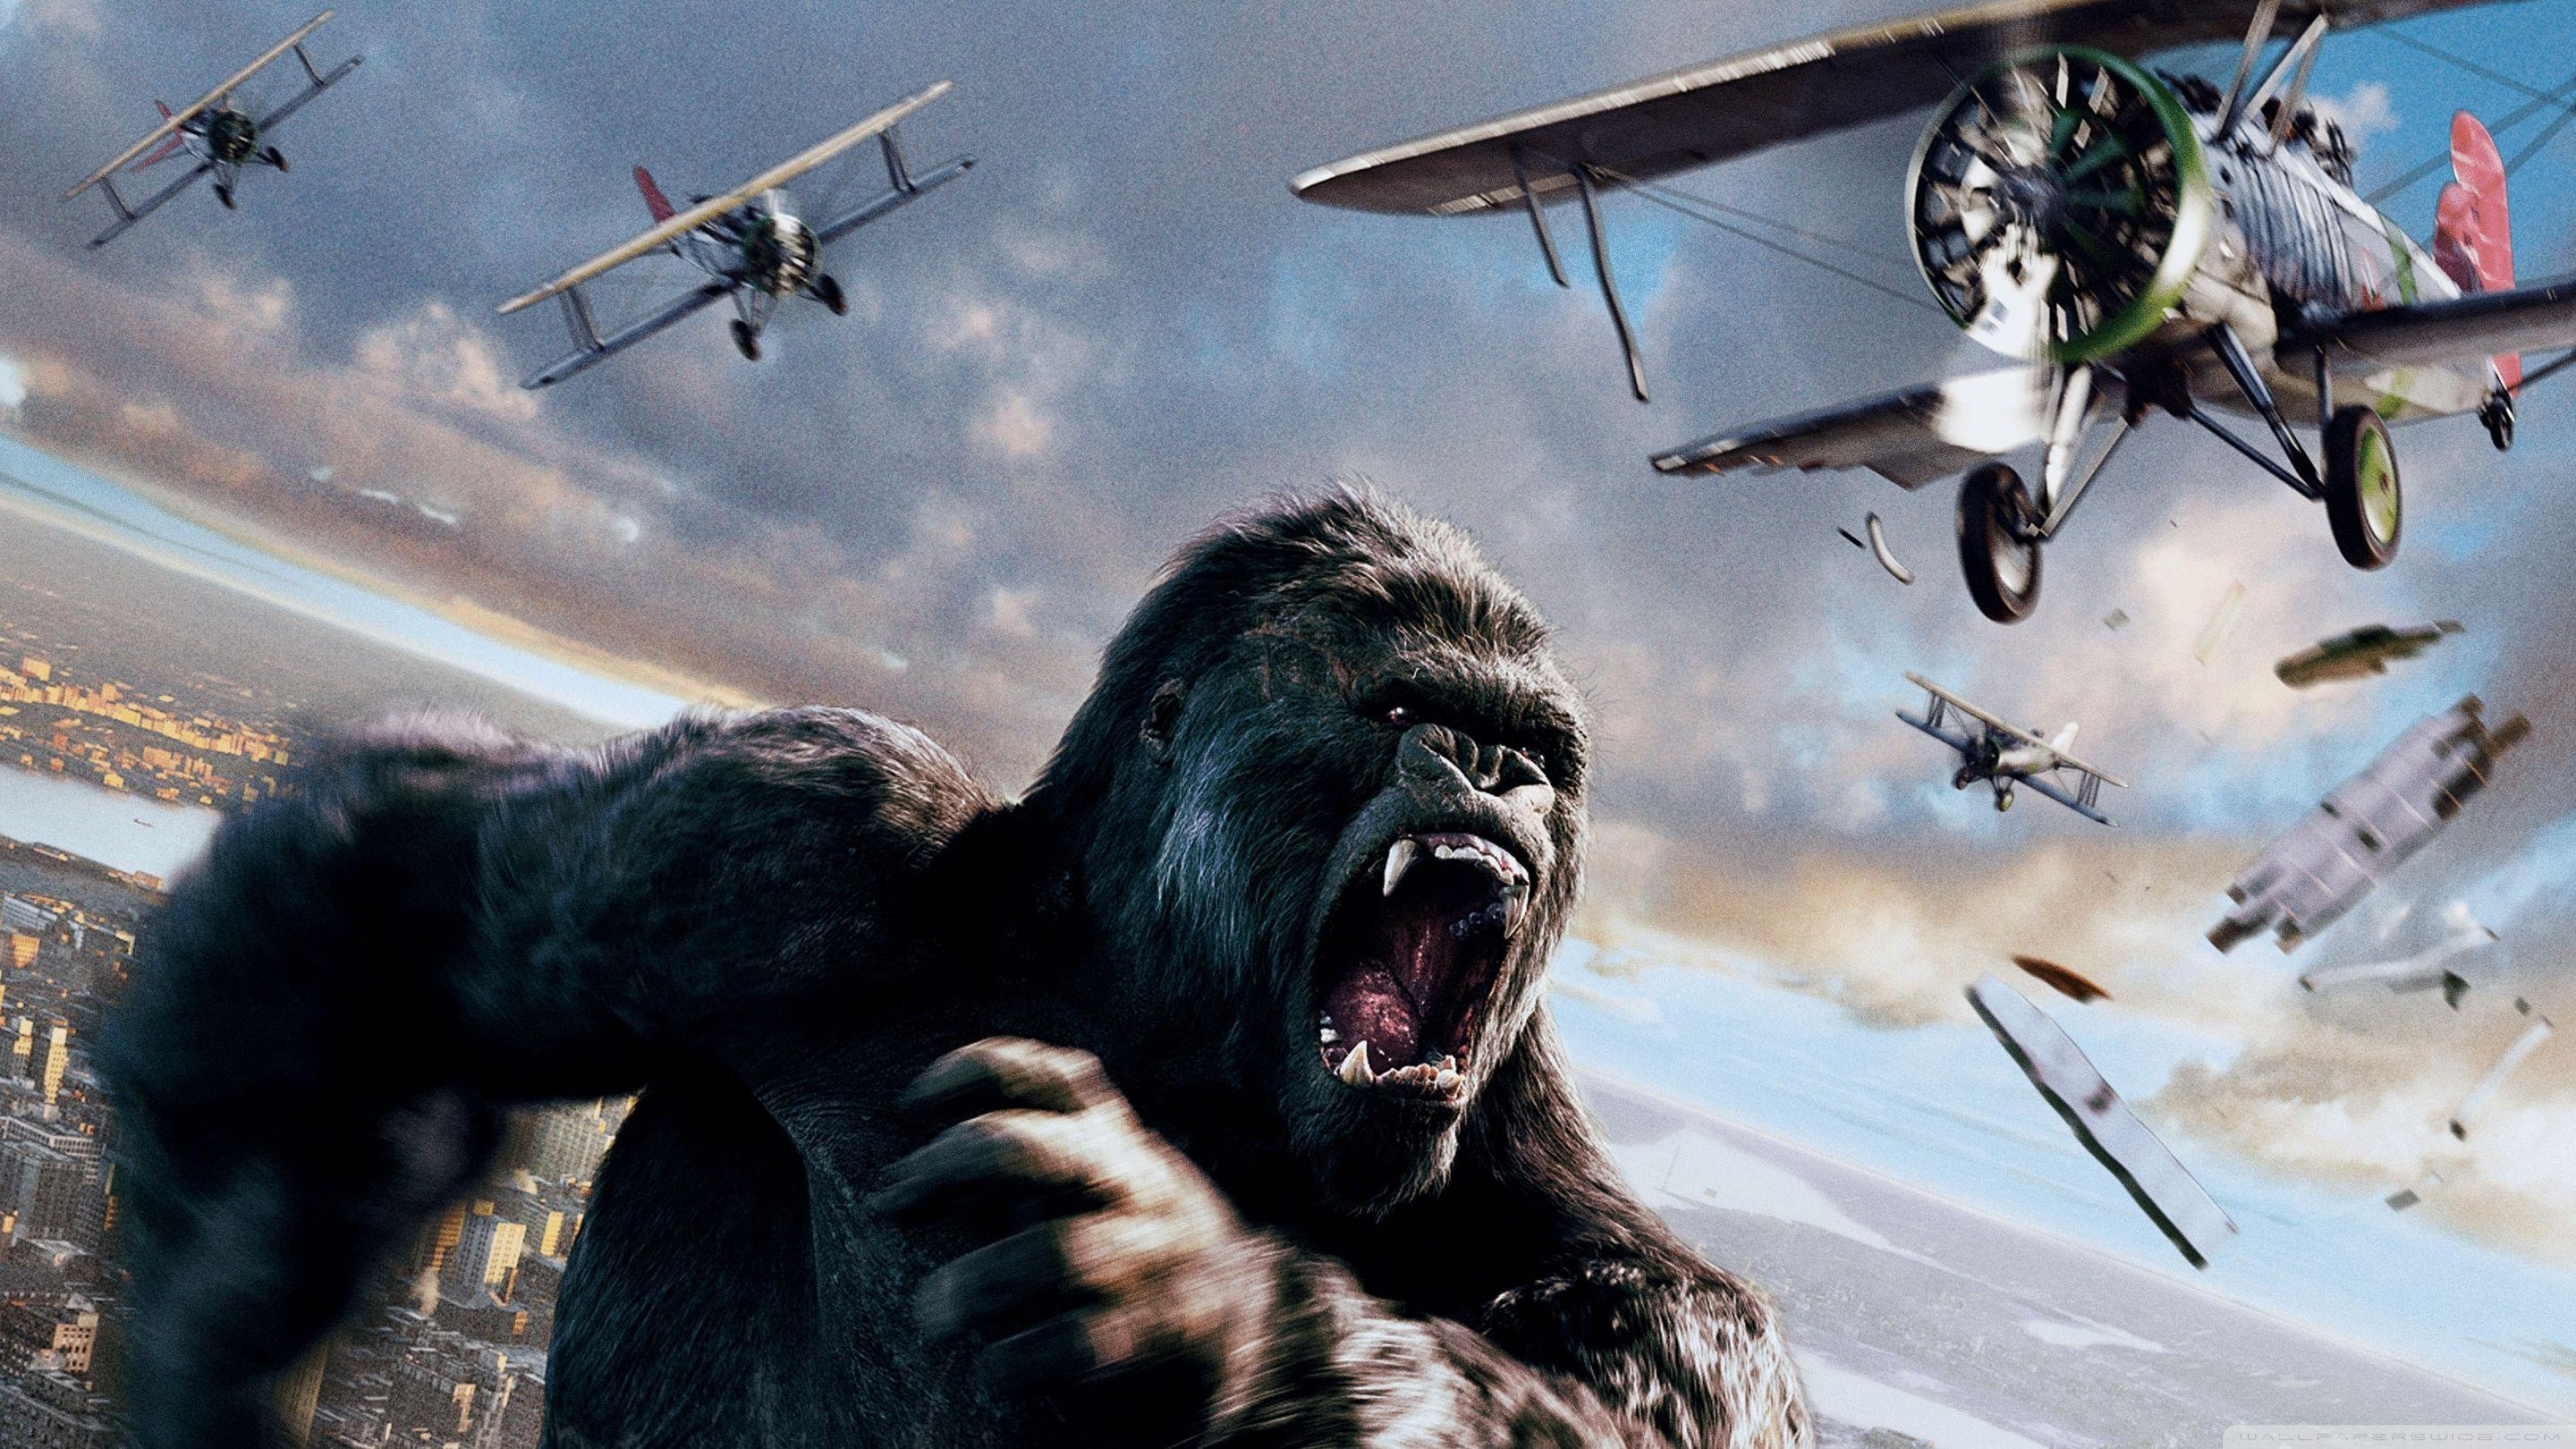 King Kong: A 2005 epic adventure monster film co-written, produced, and directed by Peter Jackson. 2880x1620 HD Wallpaper.